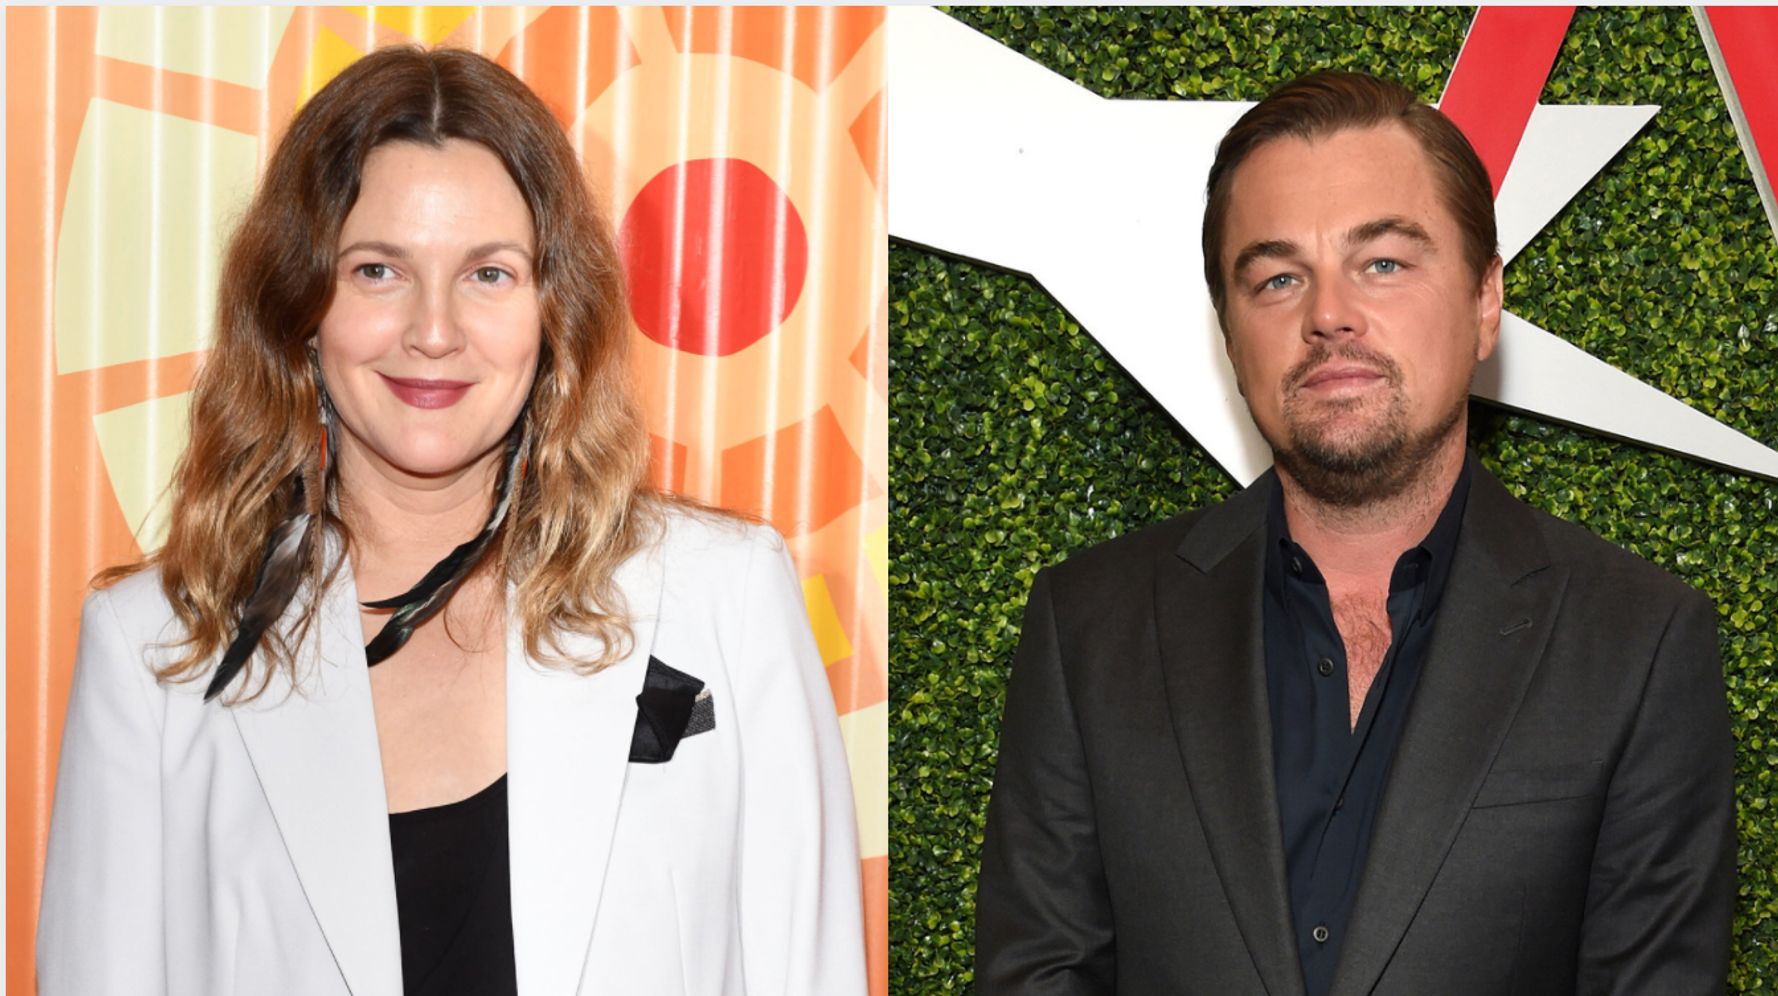 Drew Barrymore Is Now Openly Thirsting After 'Hot' Leonardo DiCaprio On Instagram